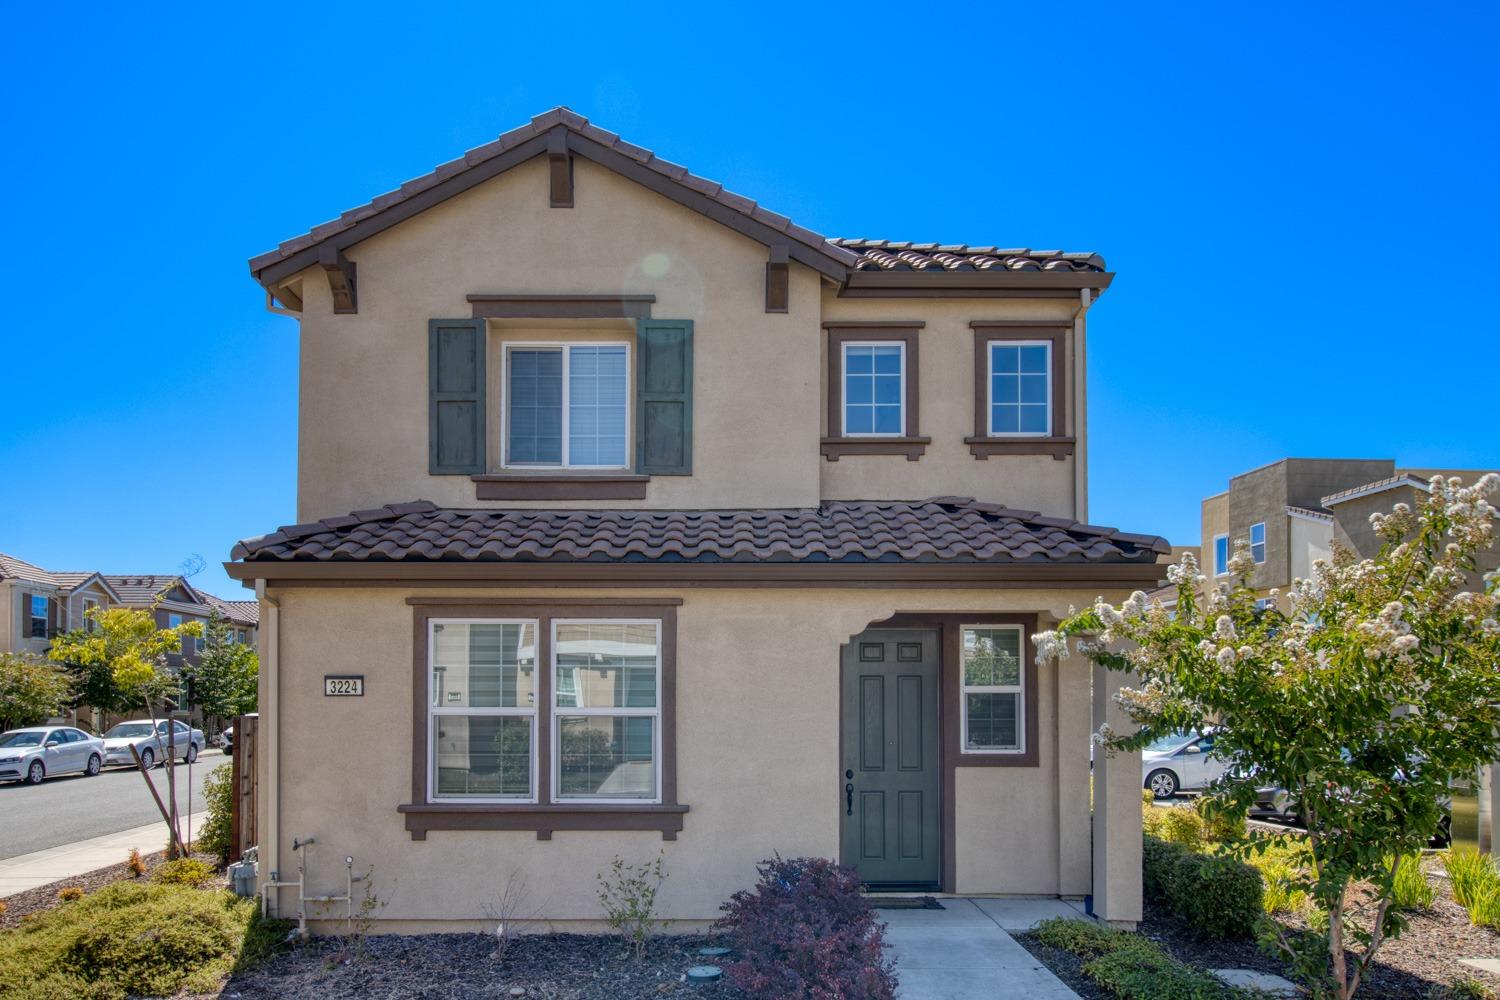 Spacious and comfortable home in Rancho Cordova! This 3 bedroom, 2.5 bath home has plenty of room fo